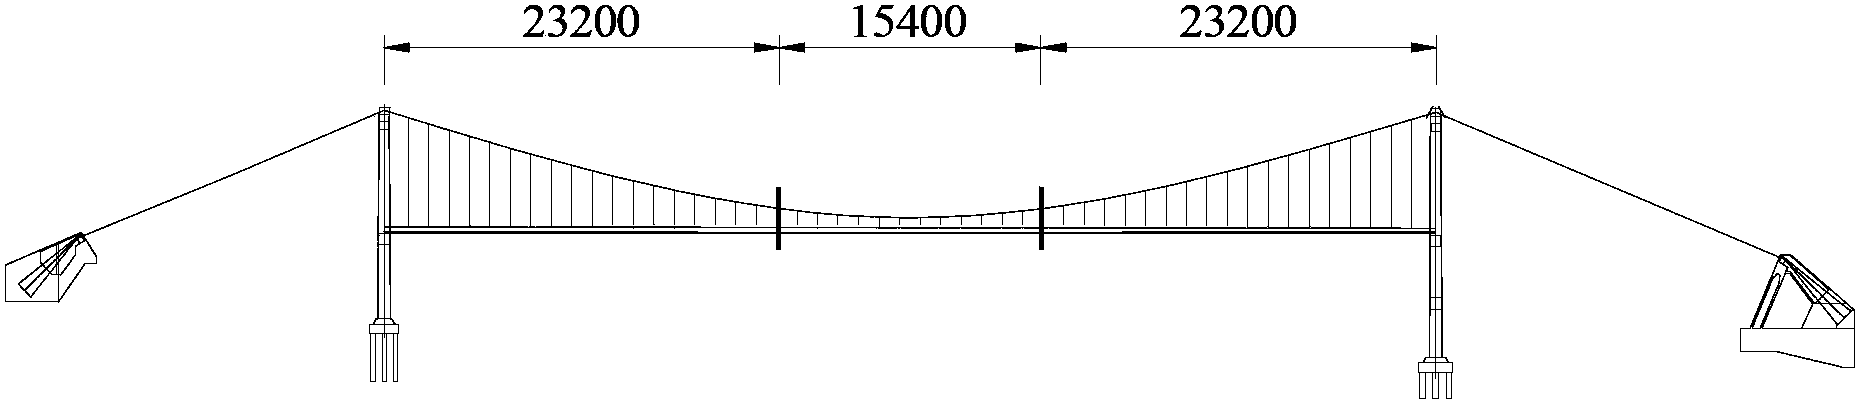 Method for identifying weights of cars based on dynamic strain of bridges